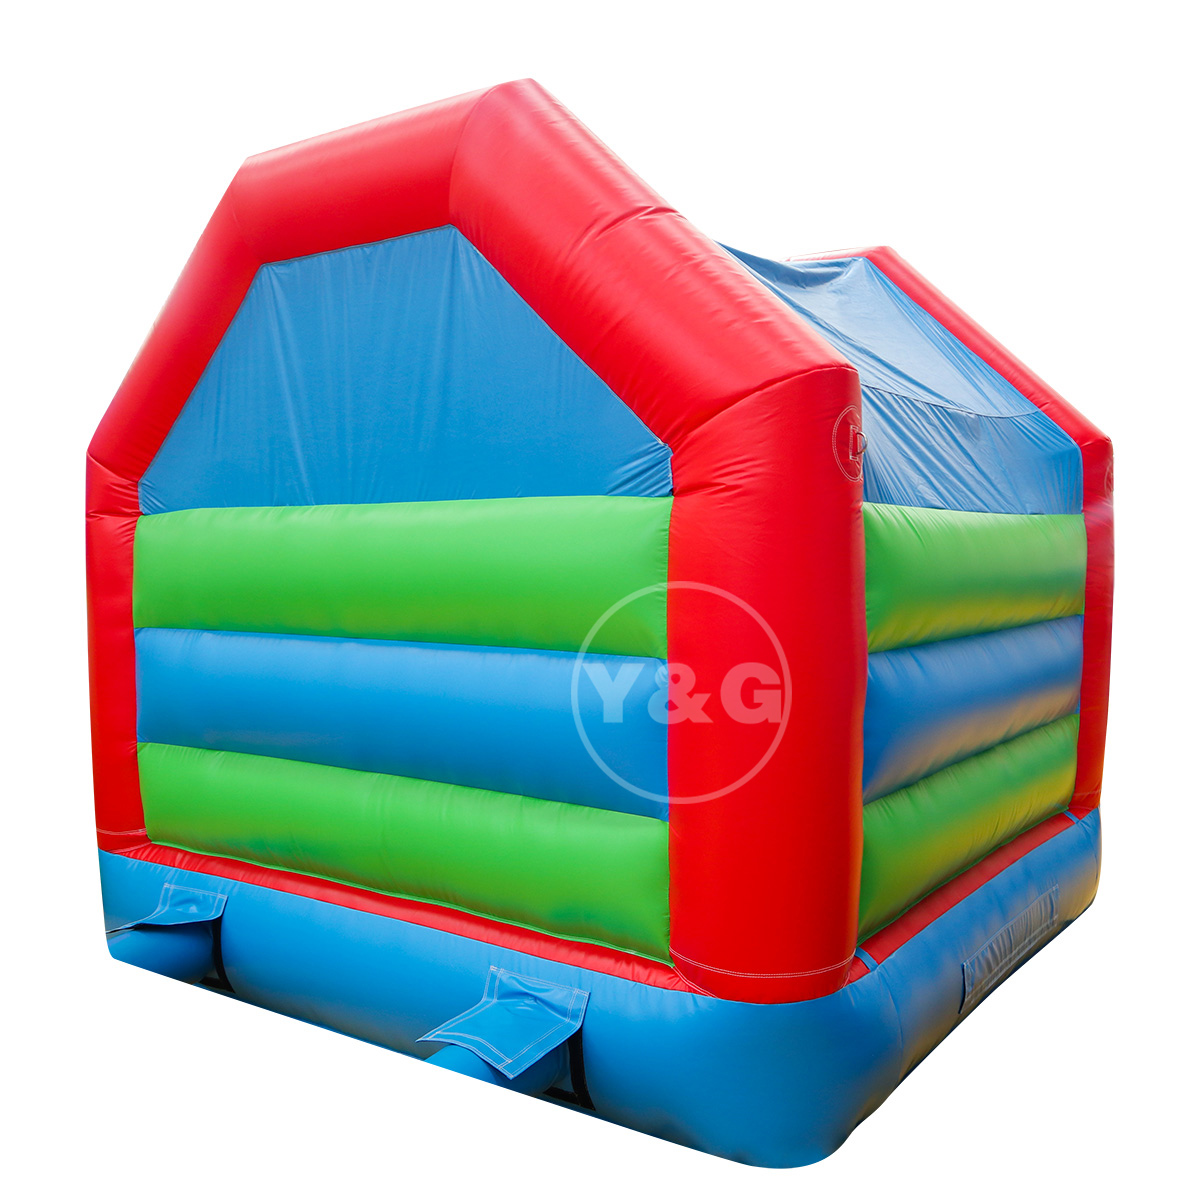 Inflatable Clown Bounce House for KidsYG-102